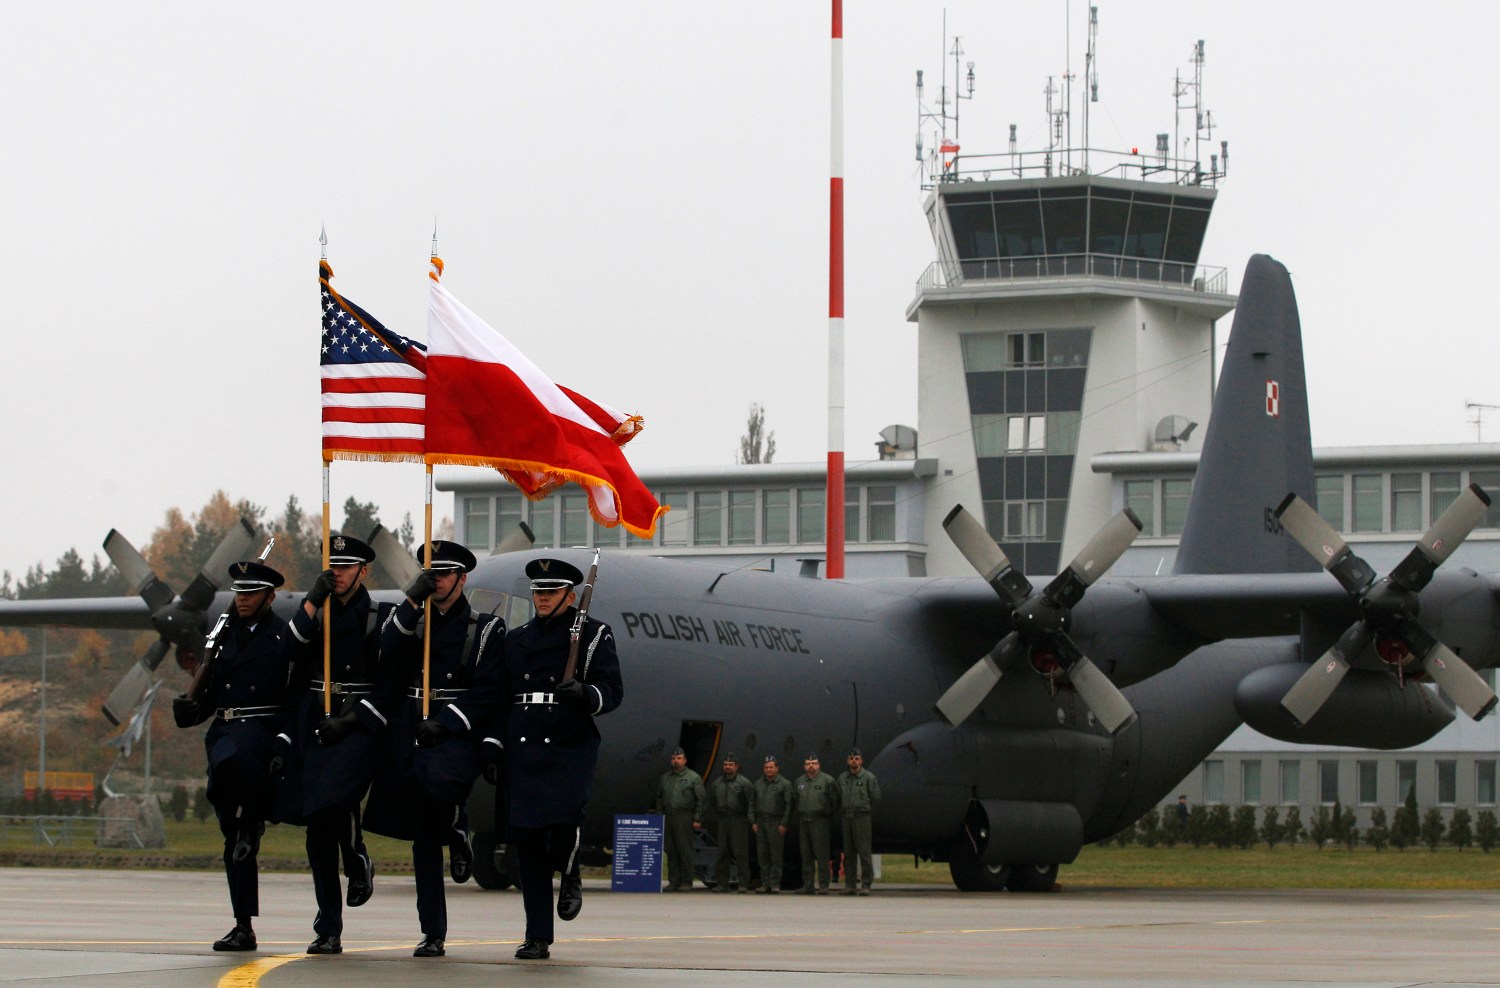 U.S. soldiers carry flags of both Poland and the United States during the opening ceremony of the first United States Air Force (USAF) aviation detachment in Poland, at an air force base in Lask near Lodz, central Poland, November 9, 2012. The United States launched its first permanent military presence on Polish soil on Friday, an air force detachment to service warplanes, in a move long sought by its NATO ally Warsaw. REUTERS/Kacper Pempel (POLAND  - Tags: POLITICS MILITARY)